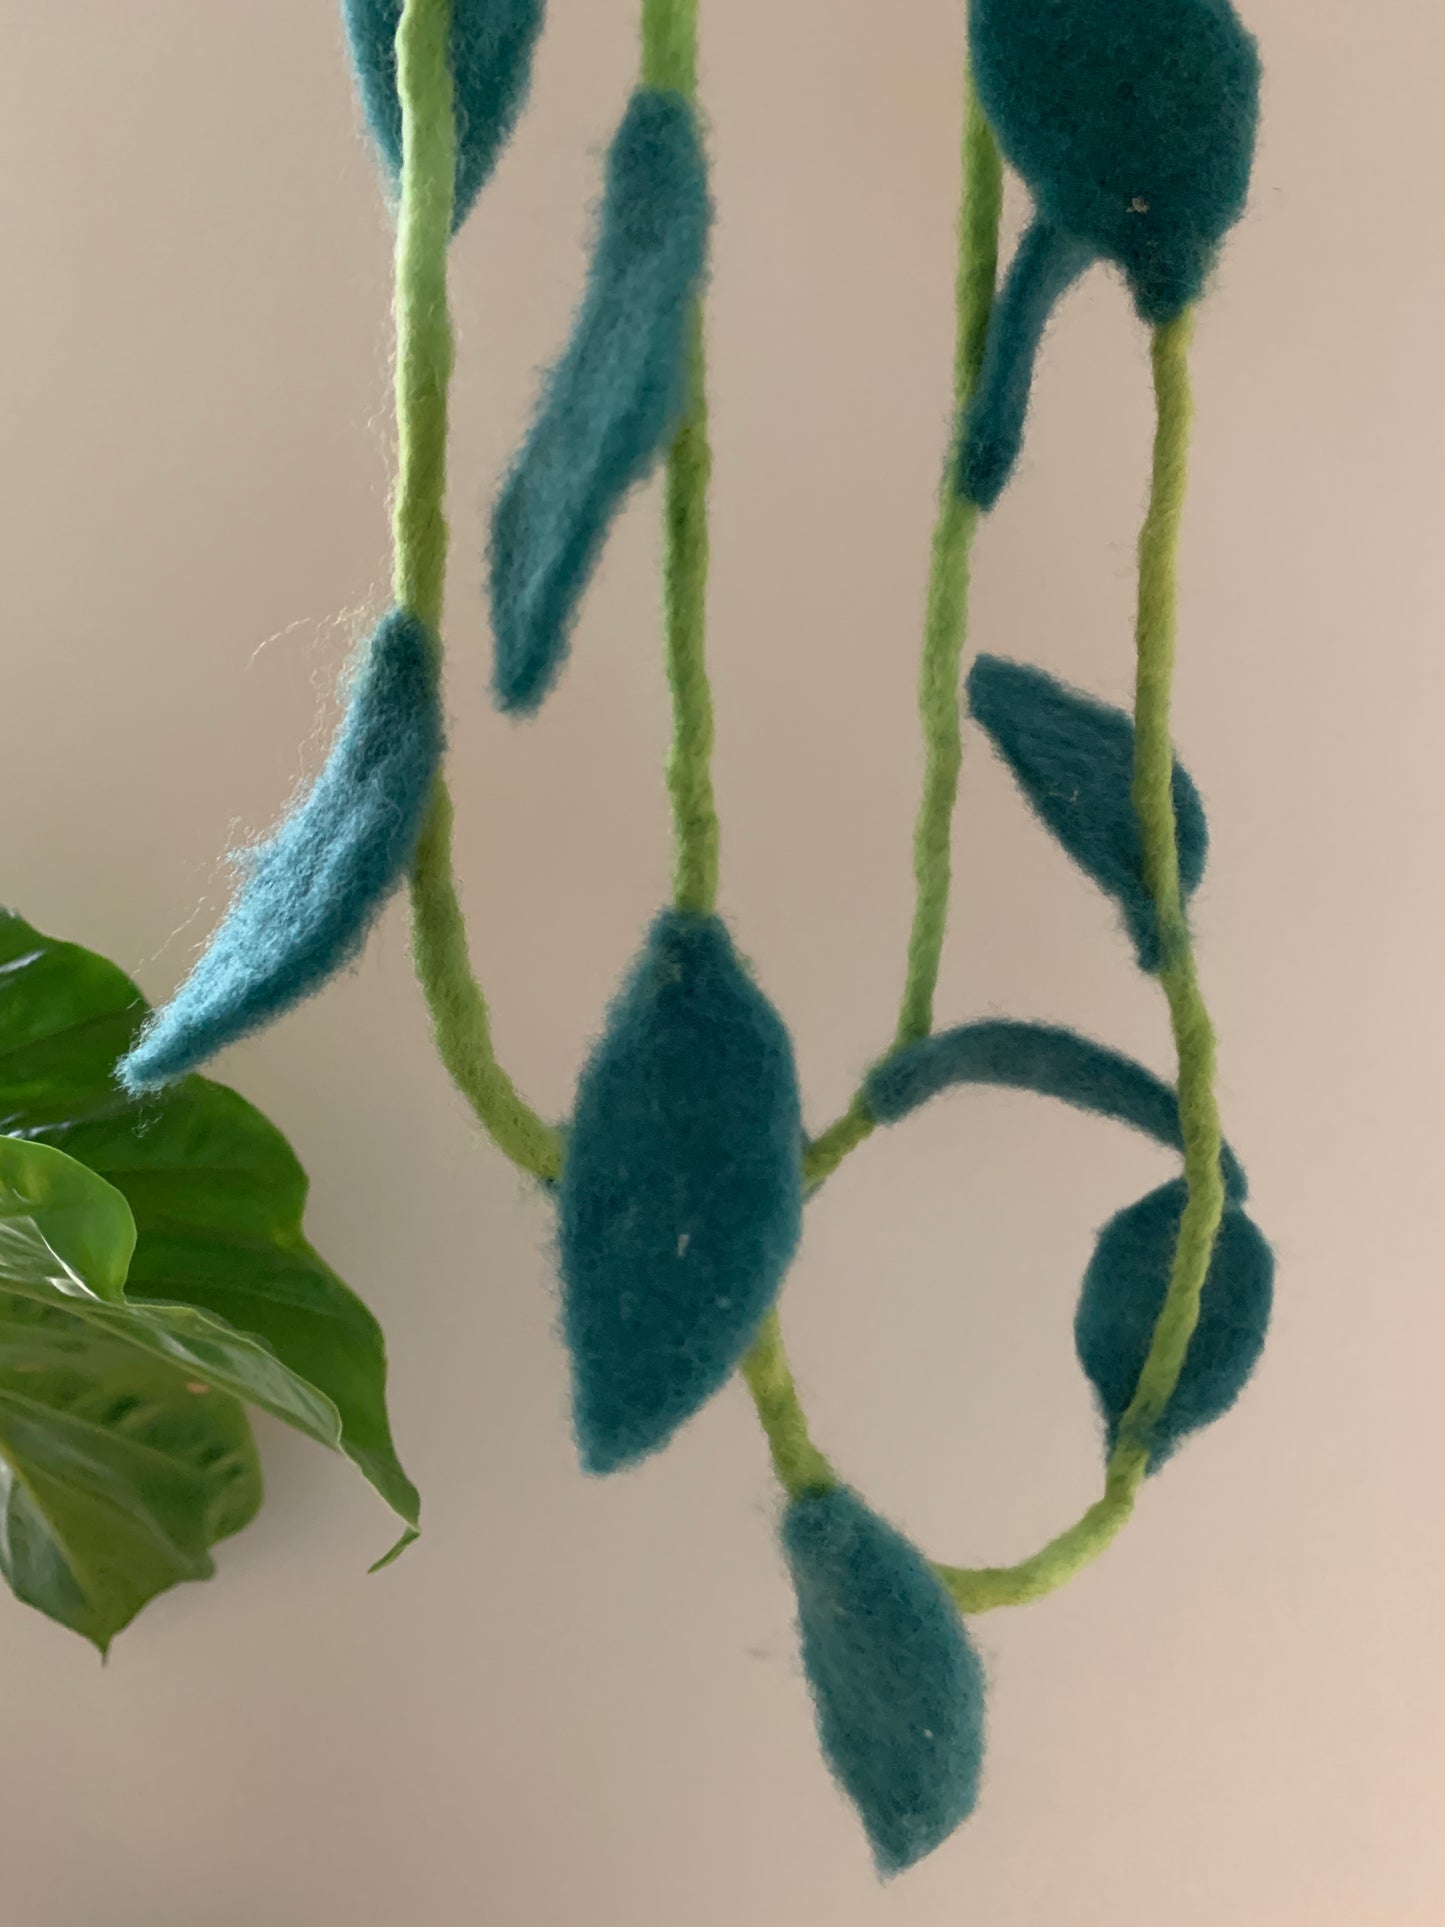 Felt garland with leaves 6 feet in length